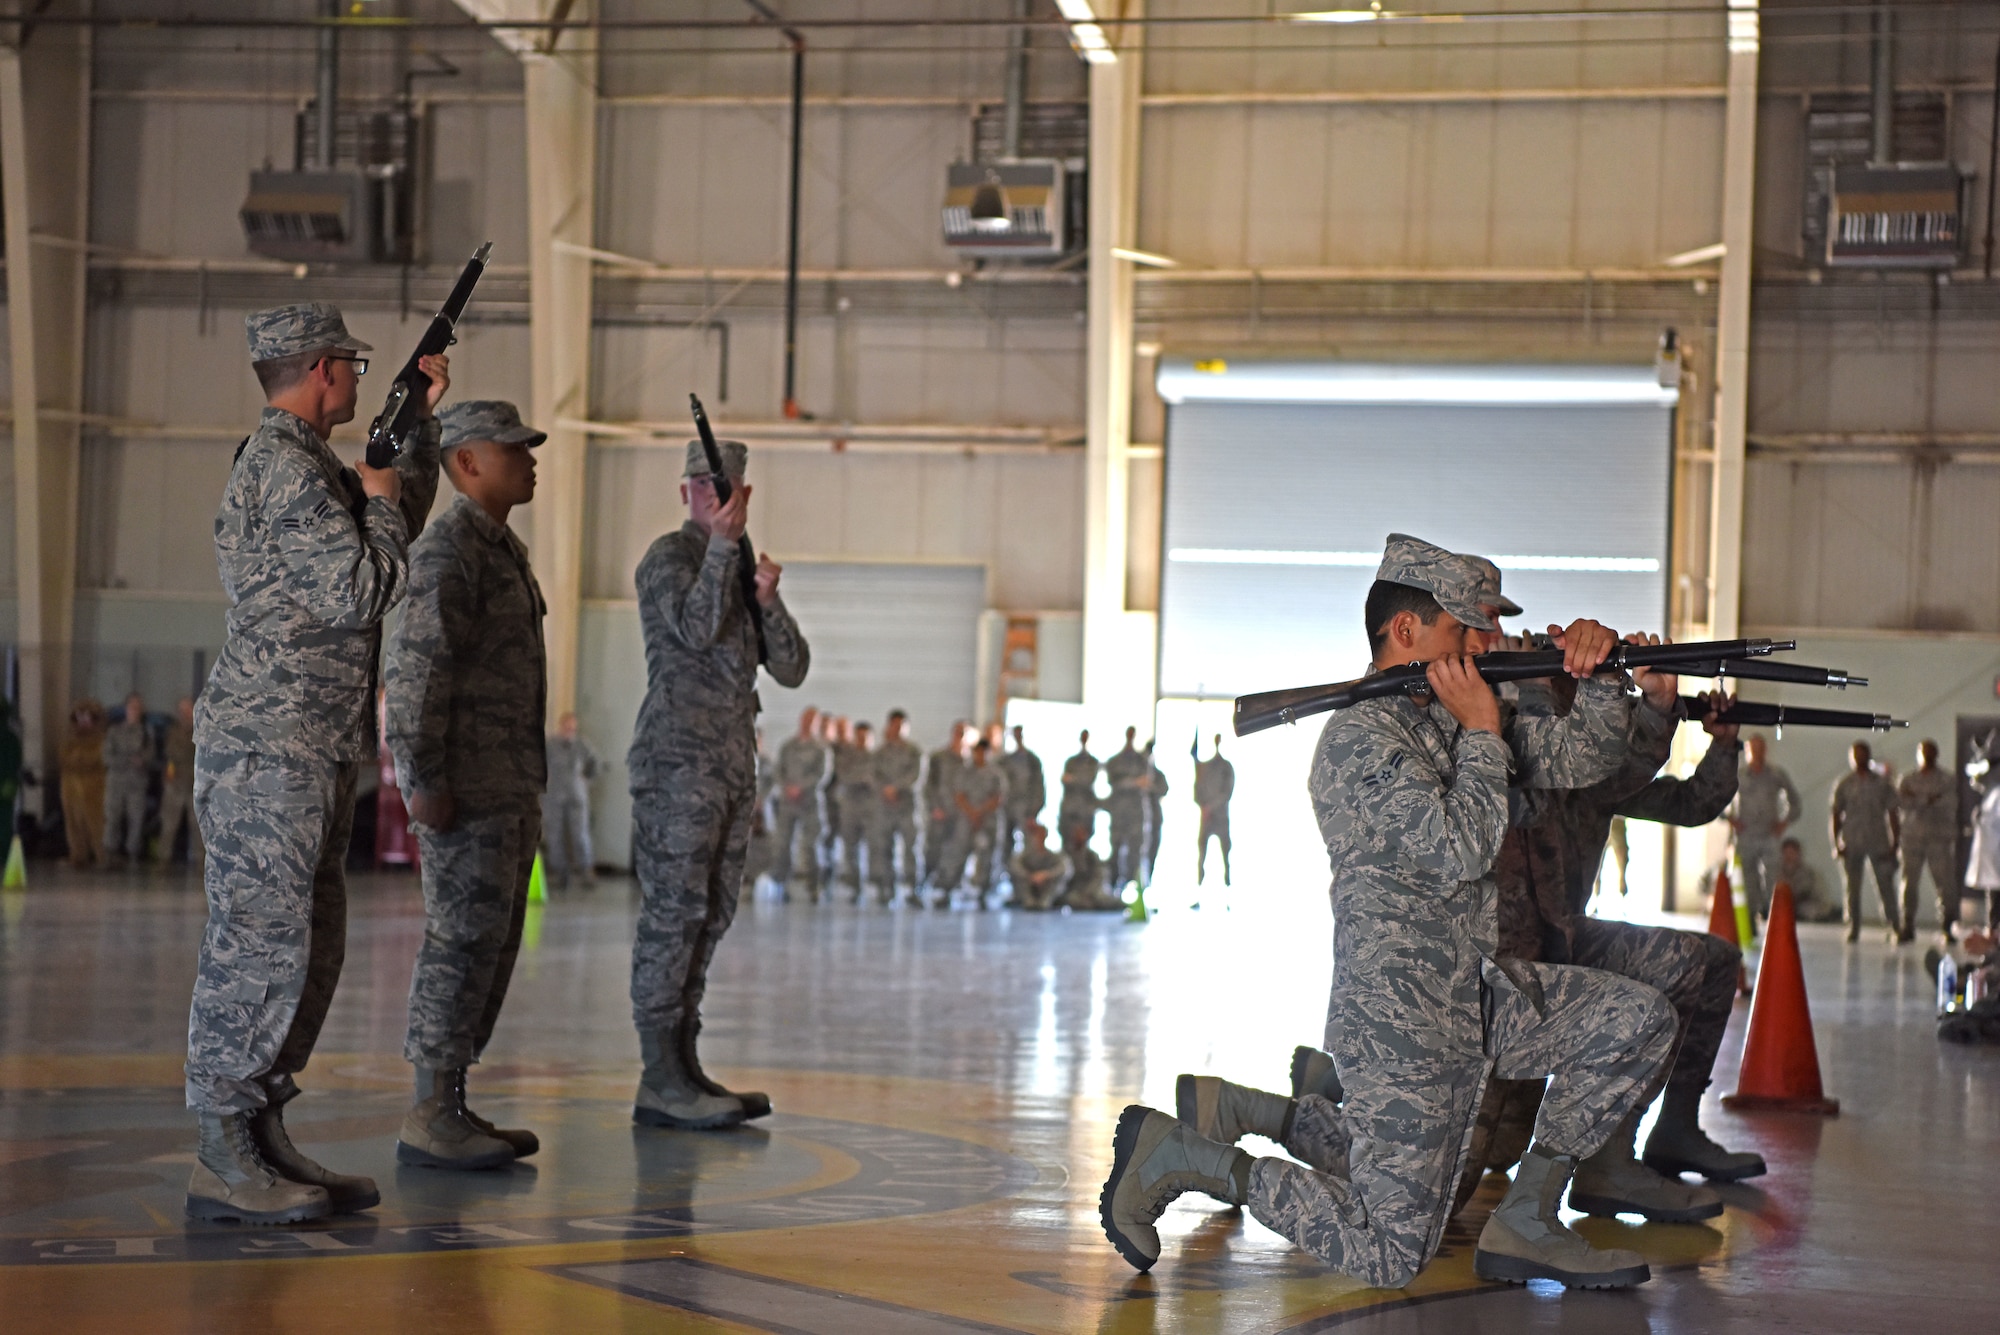 The 312th Training Squadron drill team perform their rifle routine during the drill competition at the Louis F. Garland Department of Defense Fire Academy on Goodfellow Air Force Base, Texas, April 19, 2019. The exhibition drill portion allowed teams to compete against each other using their own routines. (U.S. Air Force photo by Airman 1st Class Ethan Sherwood/Released)